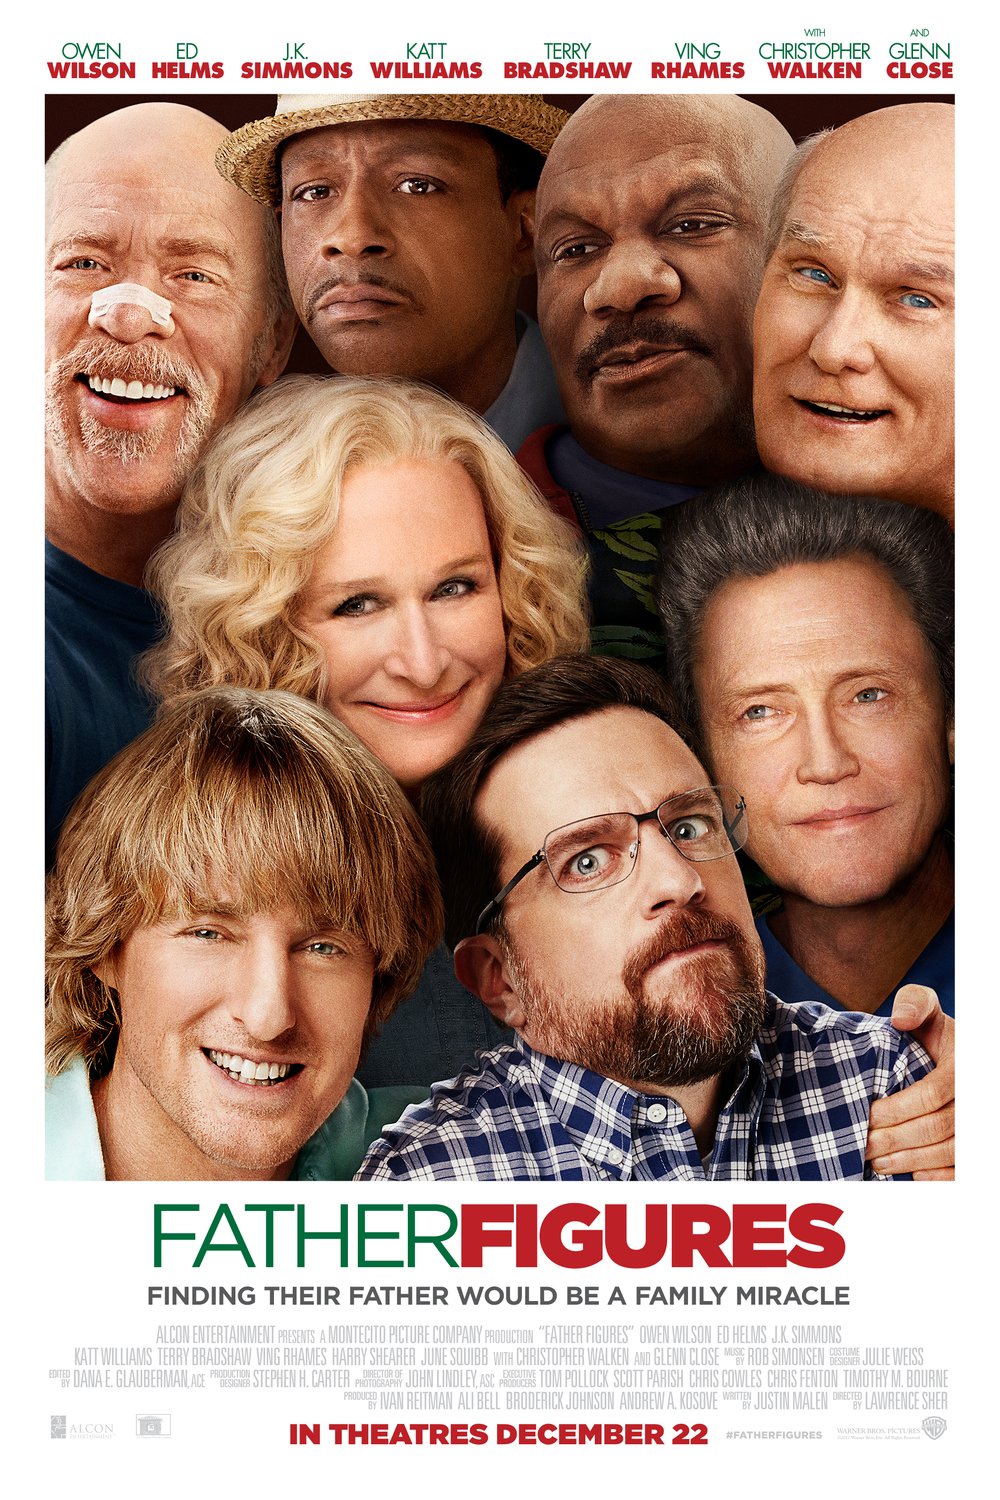 Poster of the movie Father Figures